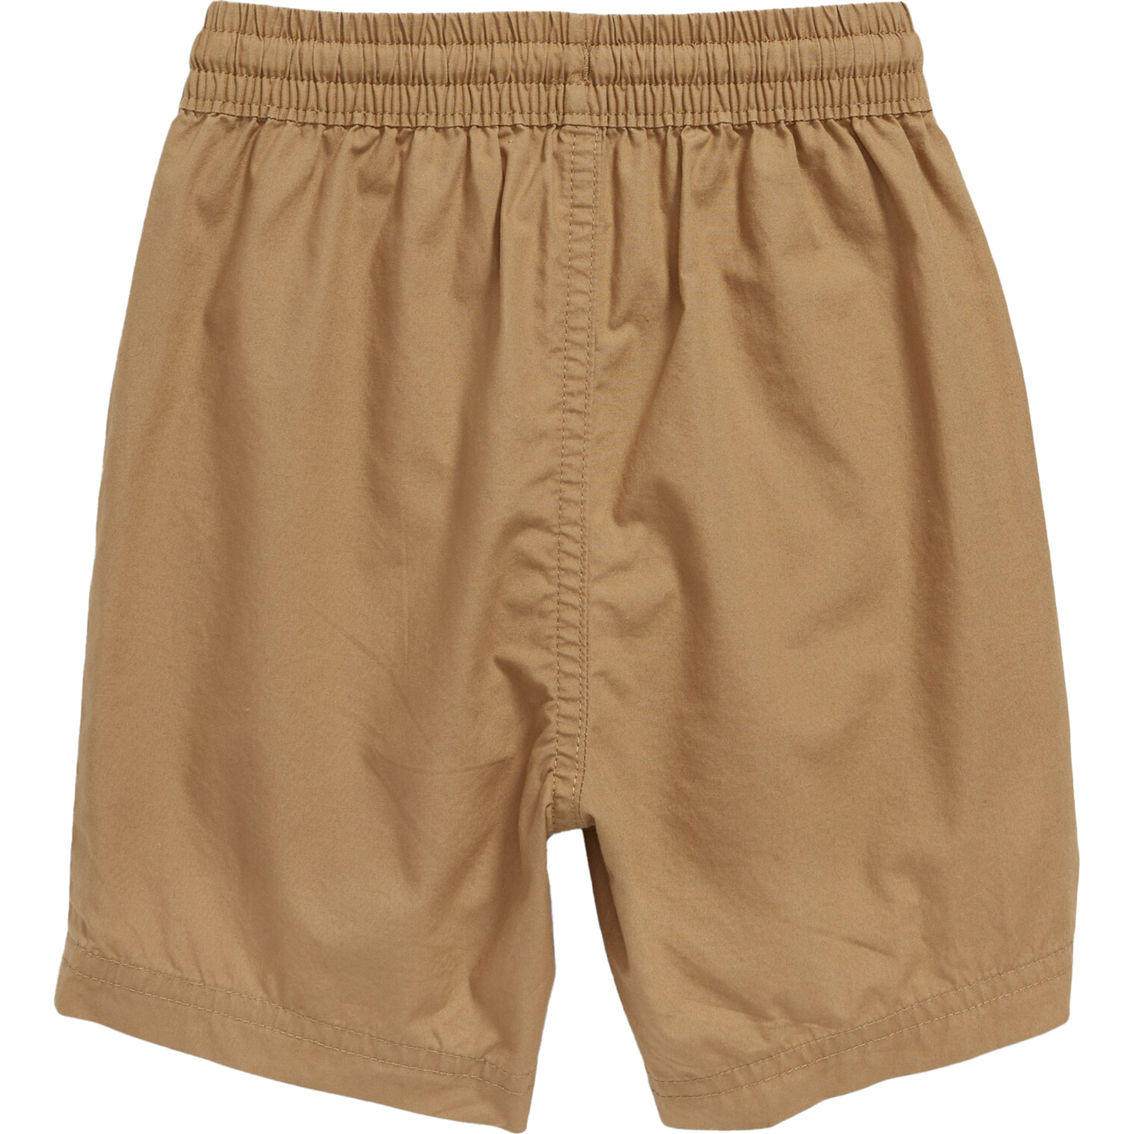 Old Navy Toddler Boys Papertouch Poplin Shorts - Image 2 of 2